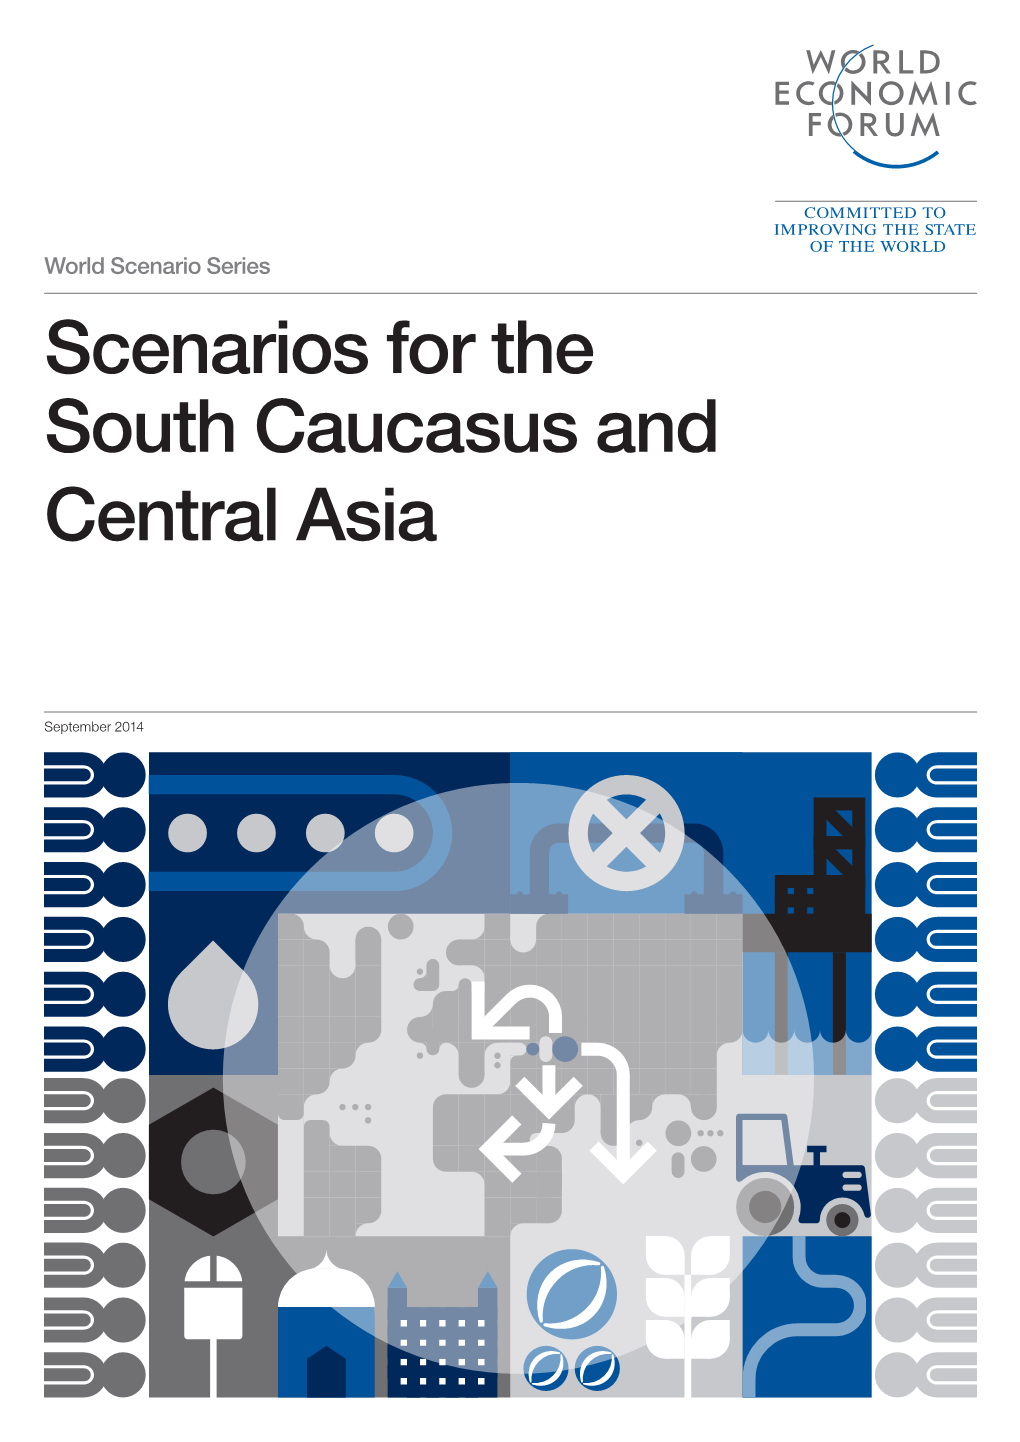 Scenarios for the South Caucasus and Central Asia